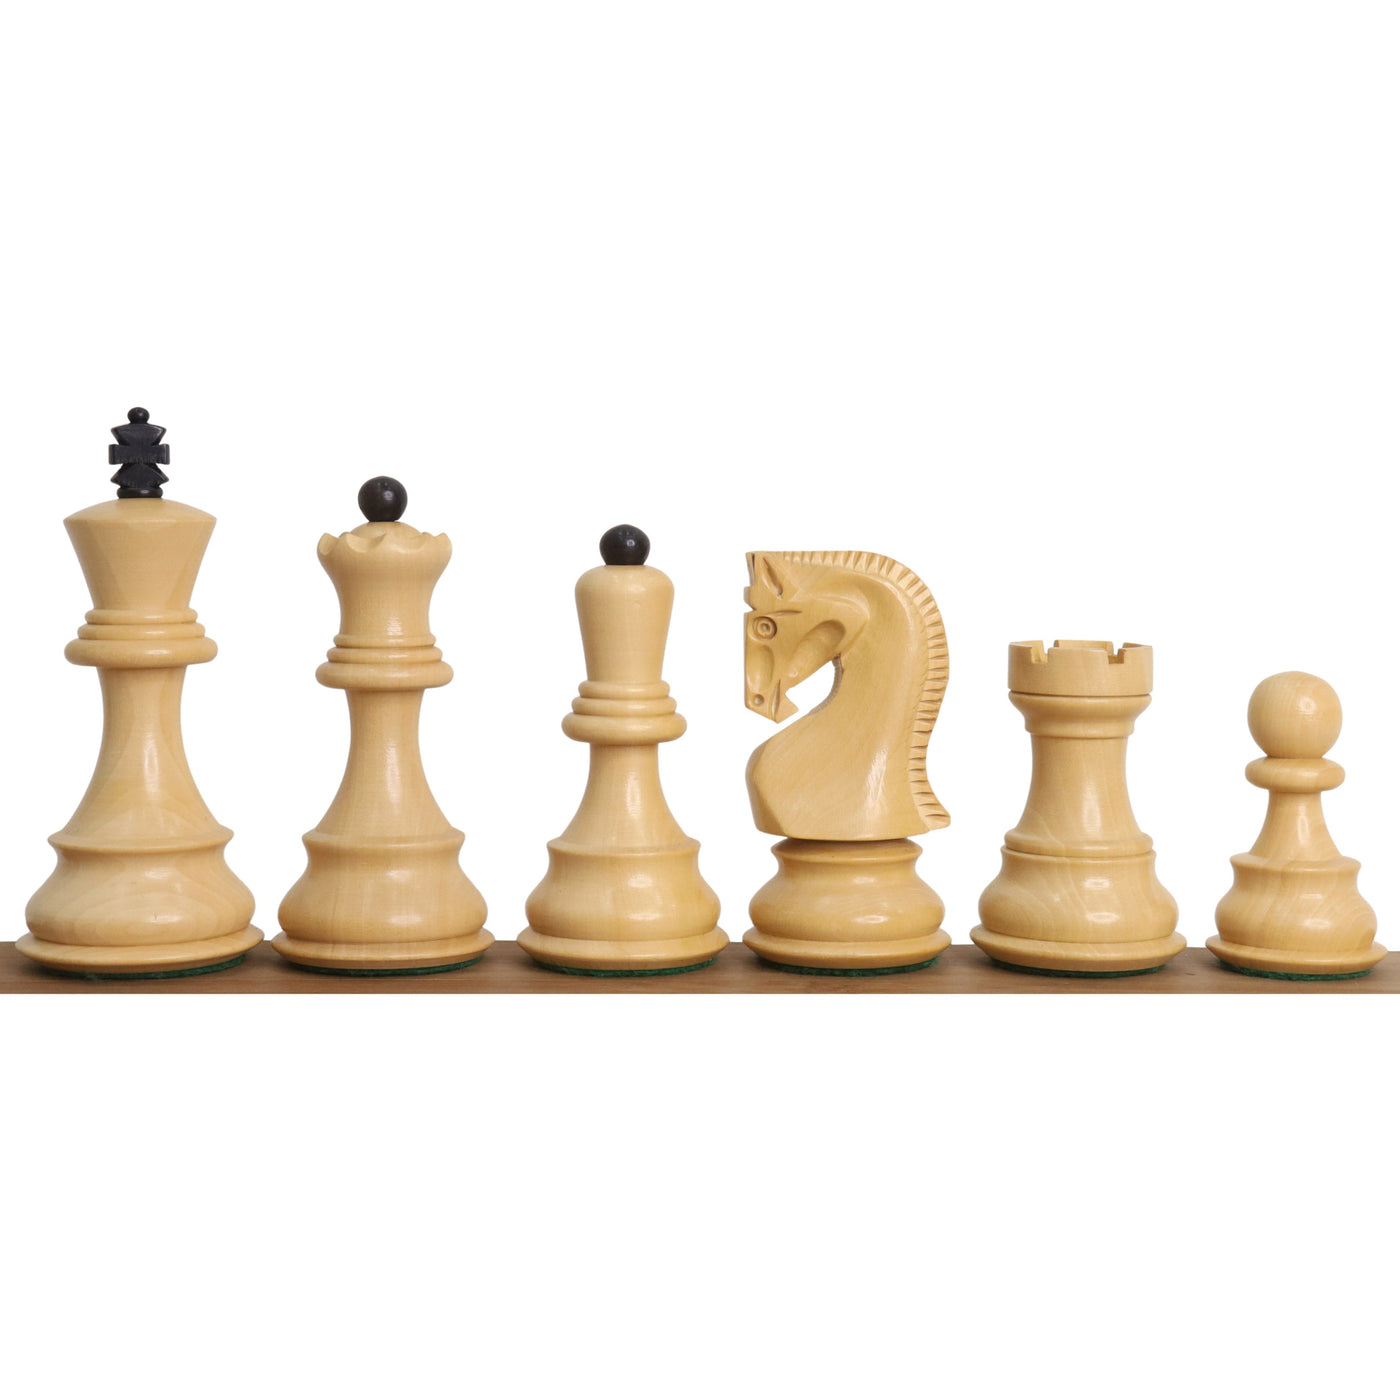 3.9" Russian Zagreb 59' Chess Set - Chess Pieces Only - Triple Weighted Ebony Wood